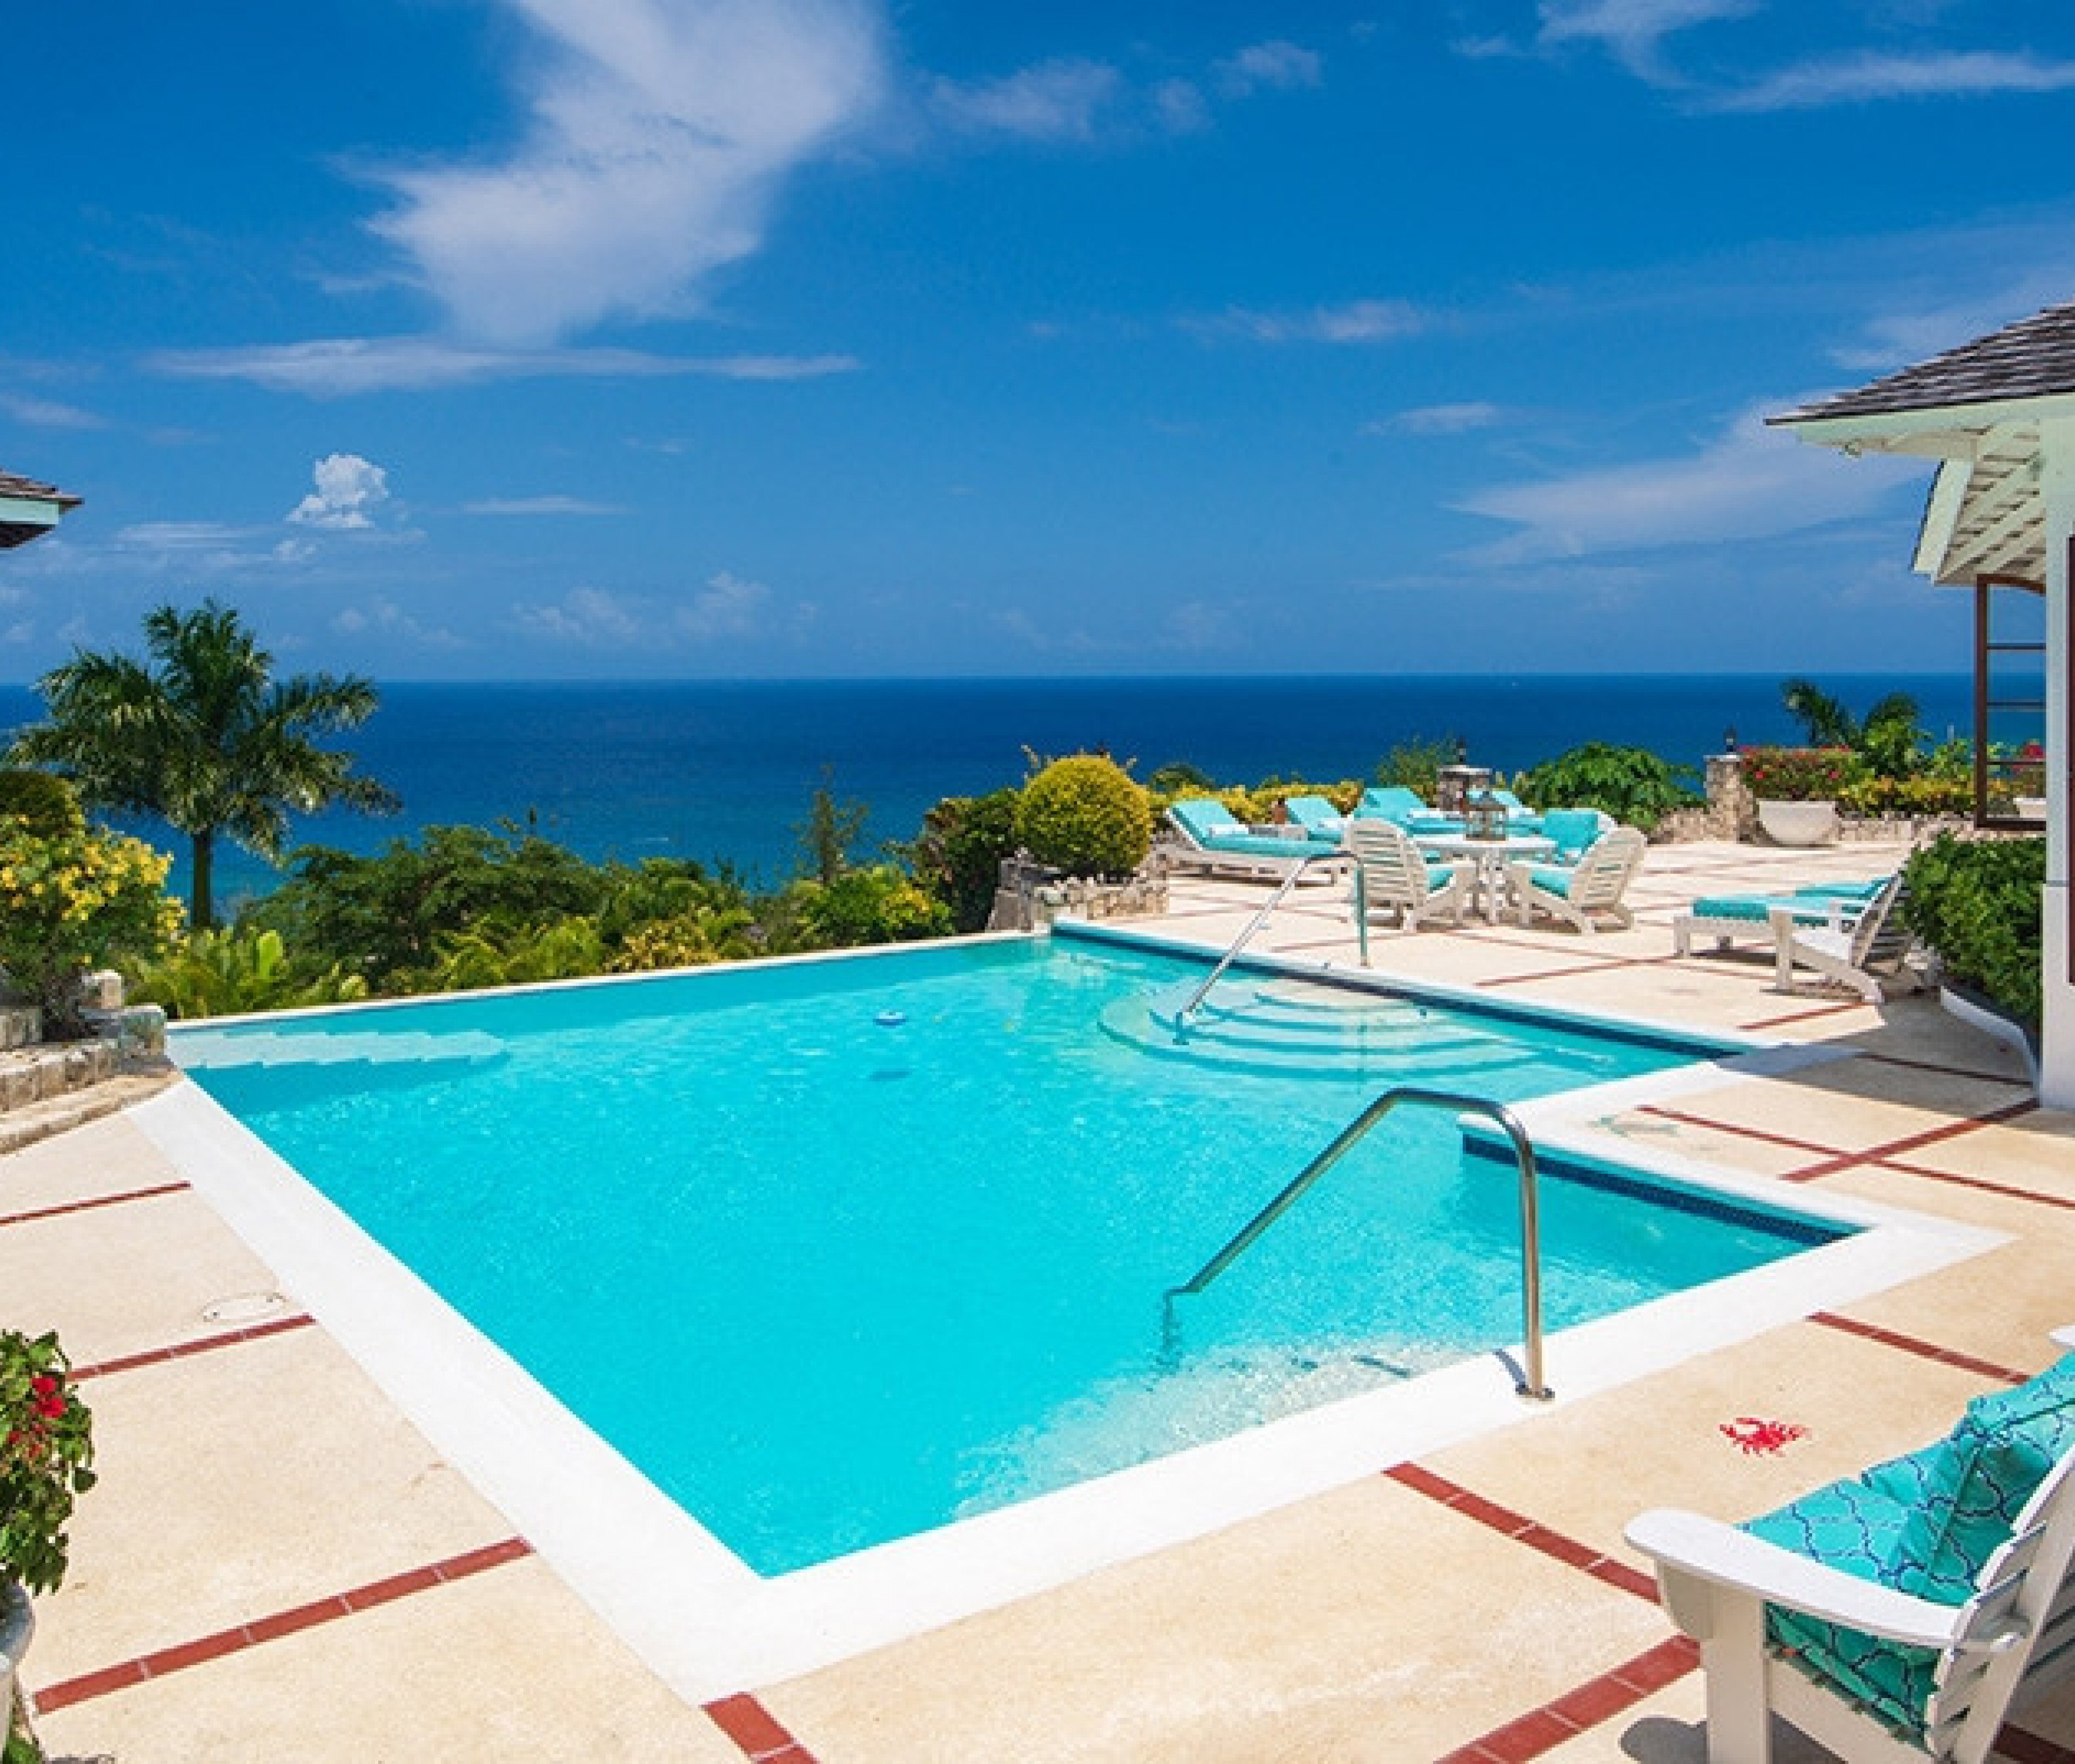 https://www.thetopvillas.com/destinations/caribbean/jamaica/montego-bay/tryall-club/no-le-hace-at-the-tryall-club/